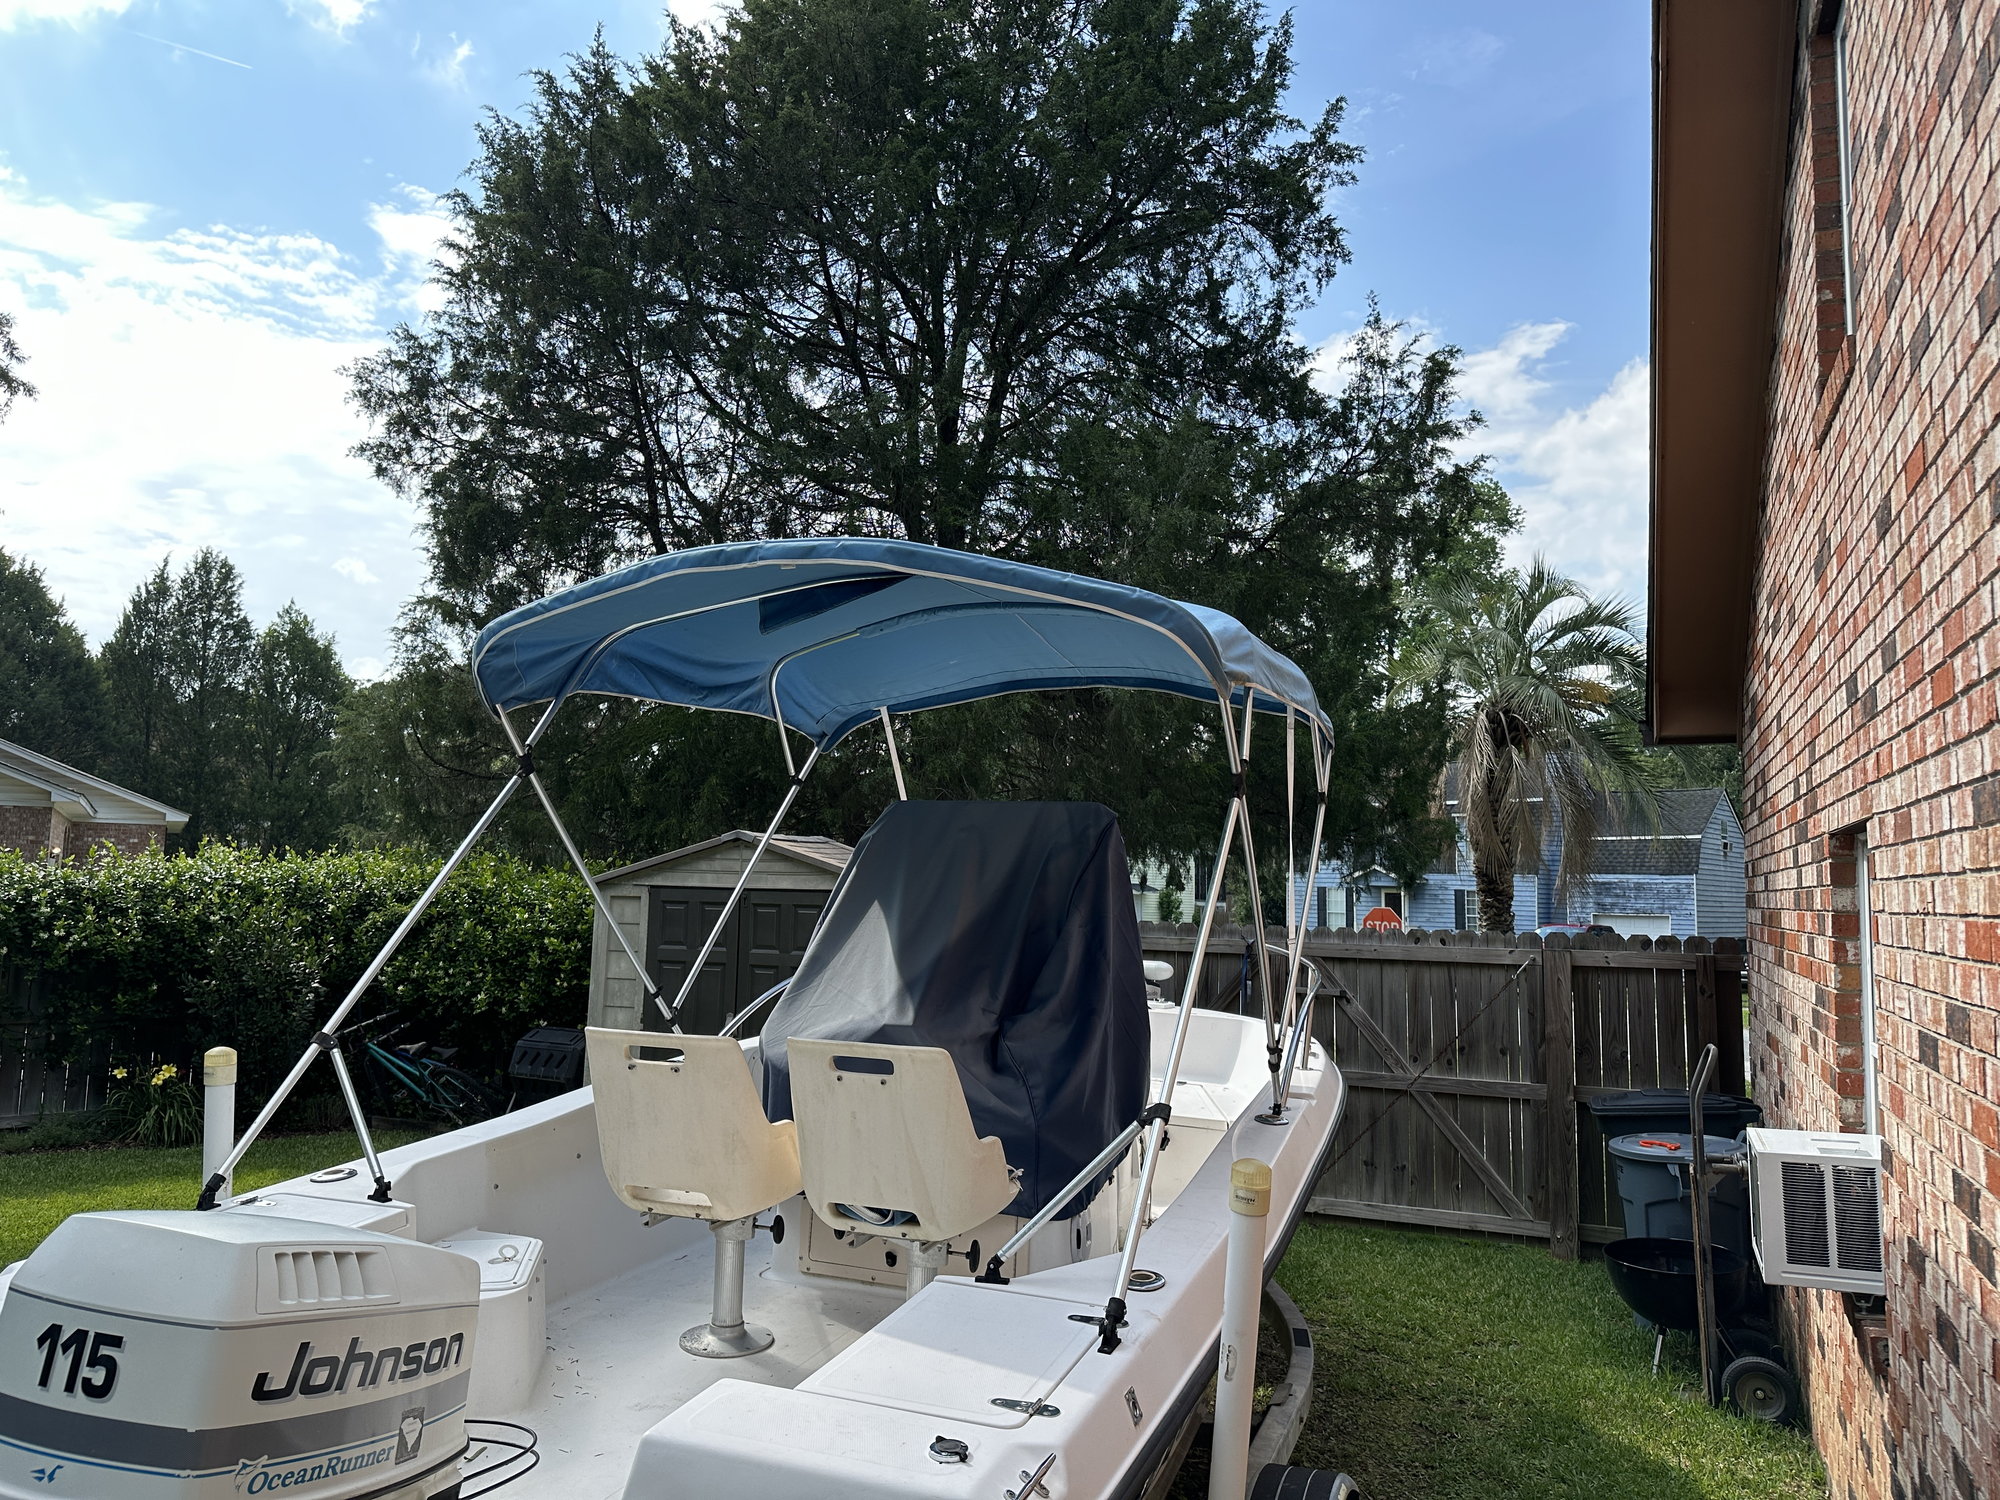 Bimini top replacement help! - The Hull Truth - Boating and Fishing Forum